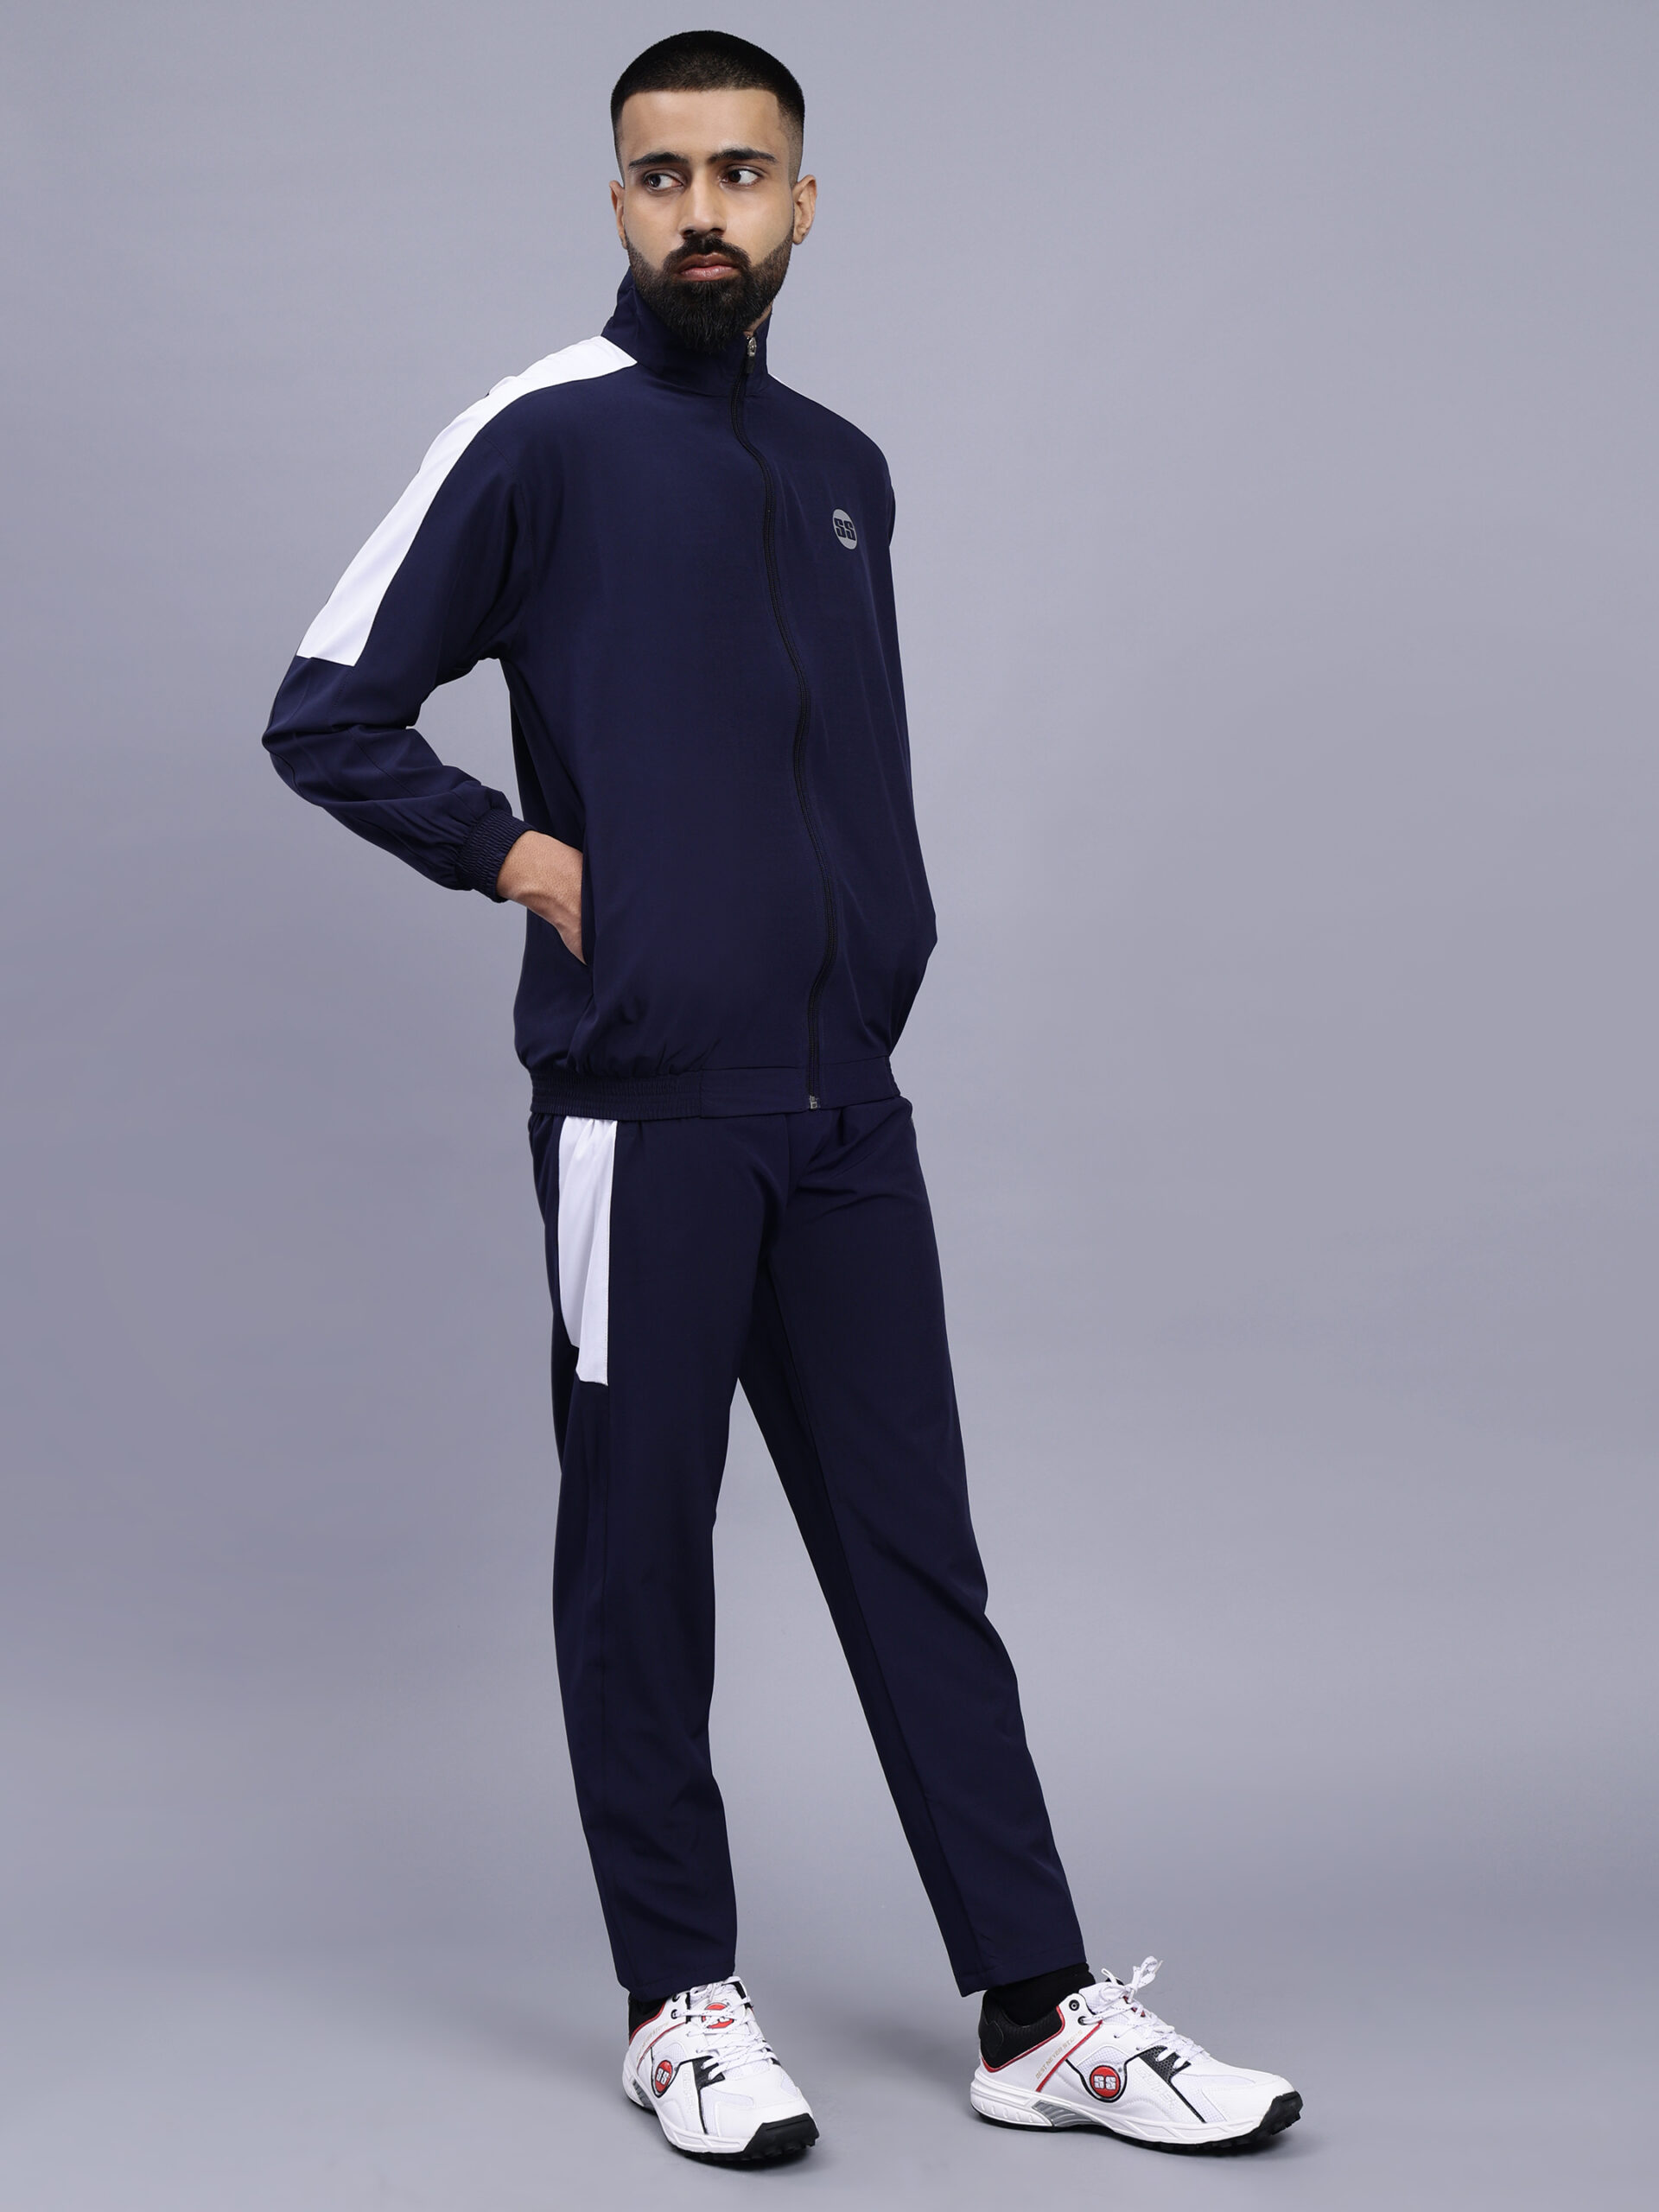 SS Master Tracksuit for Men and Boys (Navy Blue) - SS Cricket